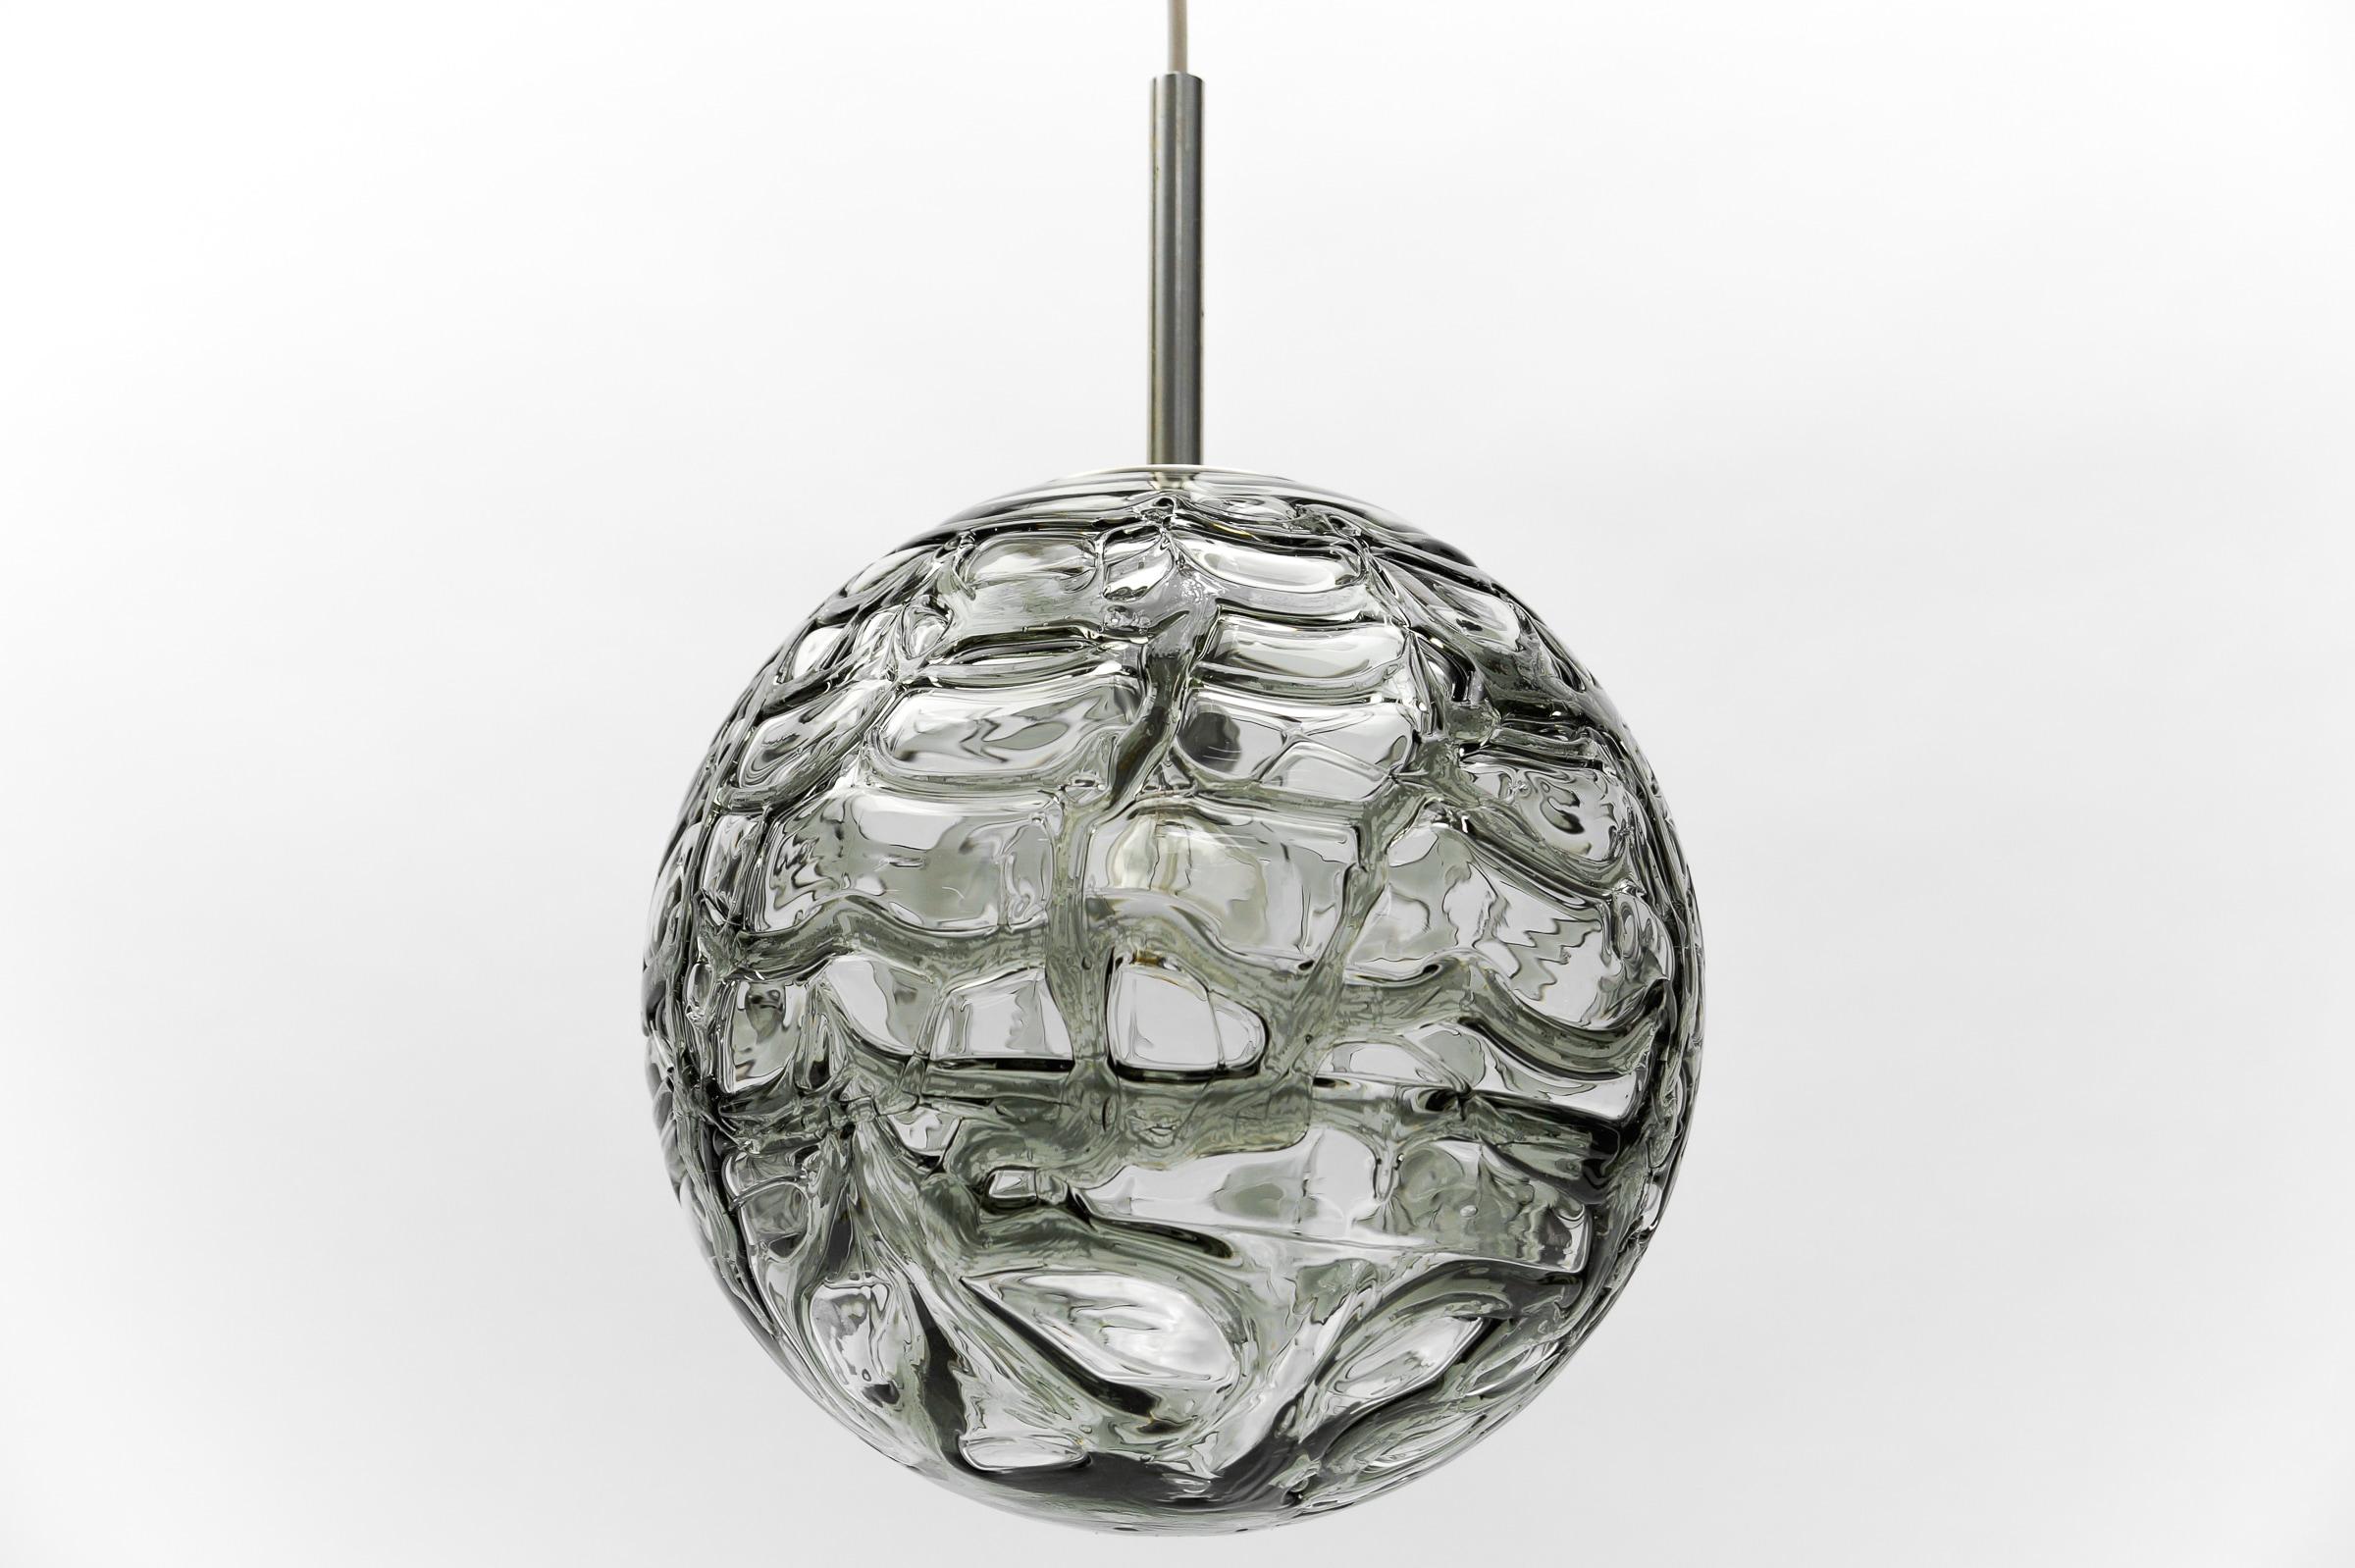 Lovely Black Murano Glass Ball Pendant Lamp by Doria, - 1960s Germany In Good Condition For Sale In Nürnberg, Bayern